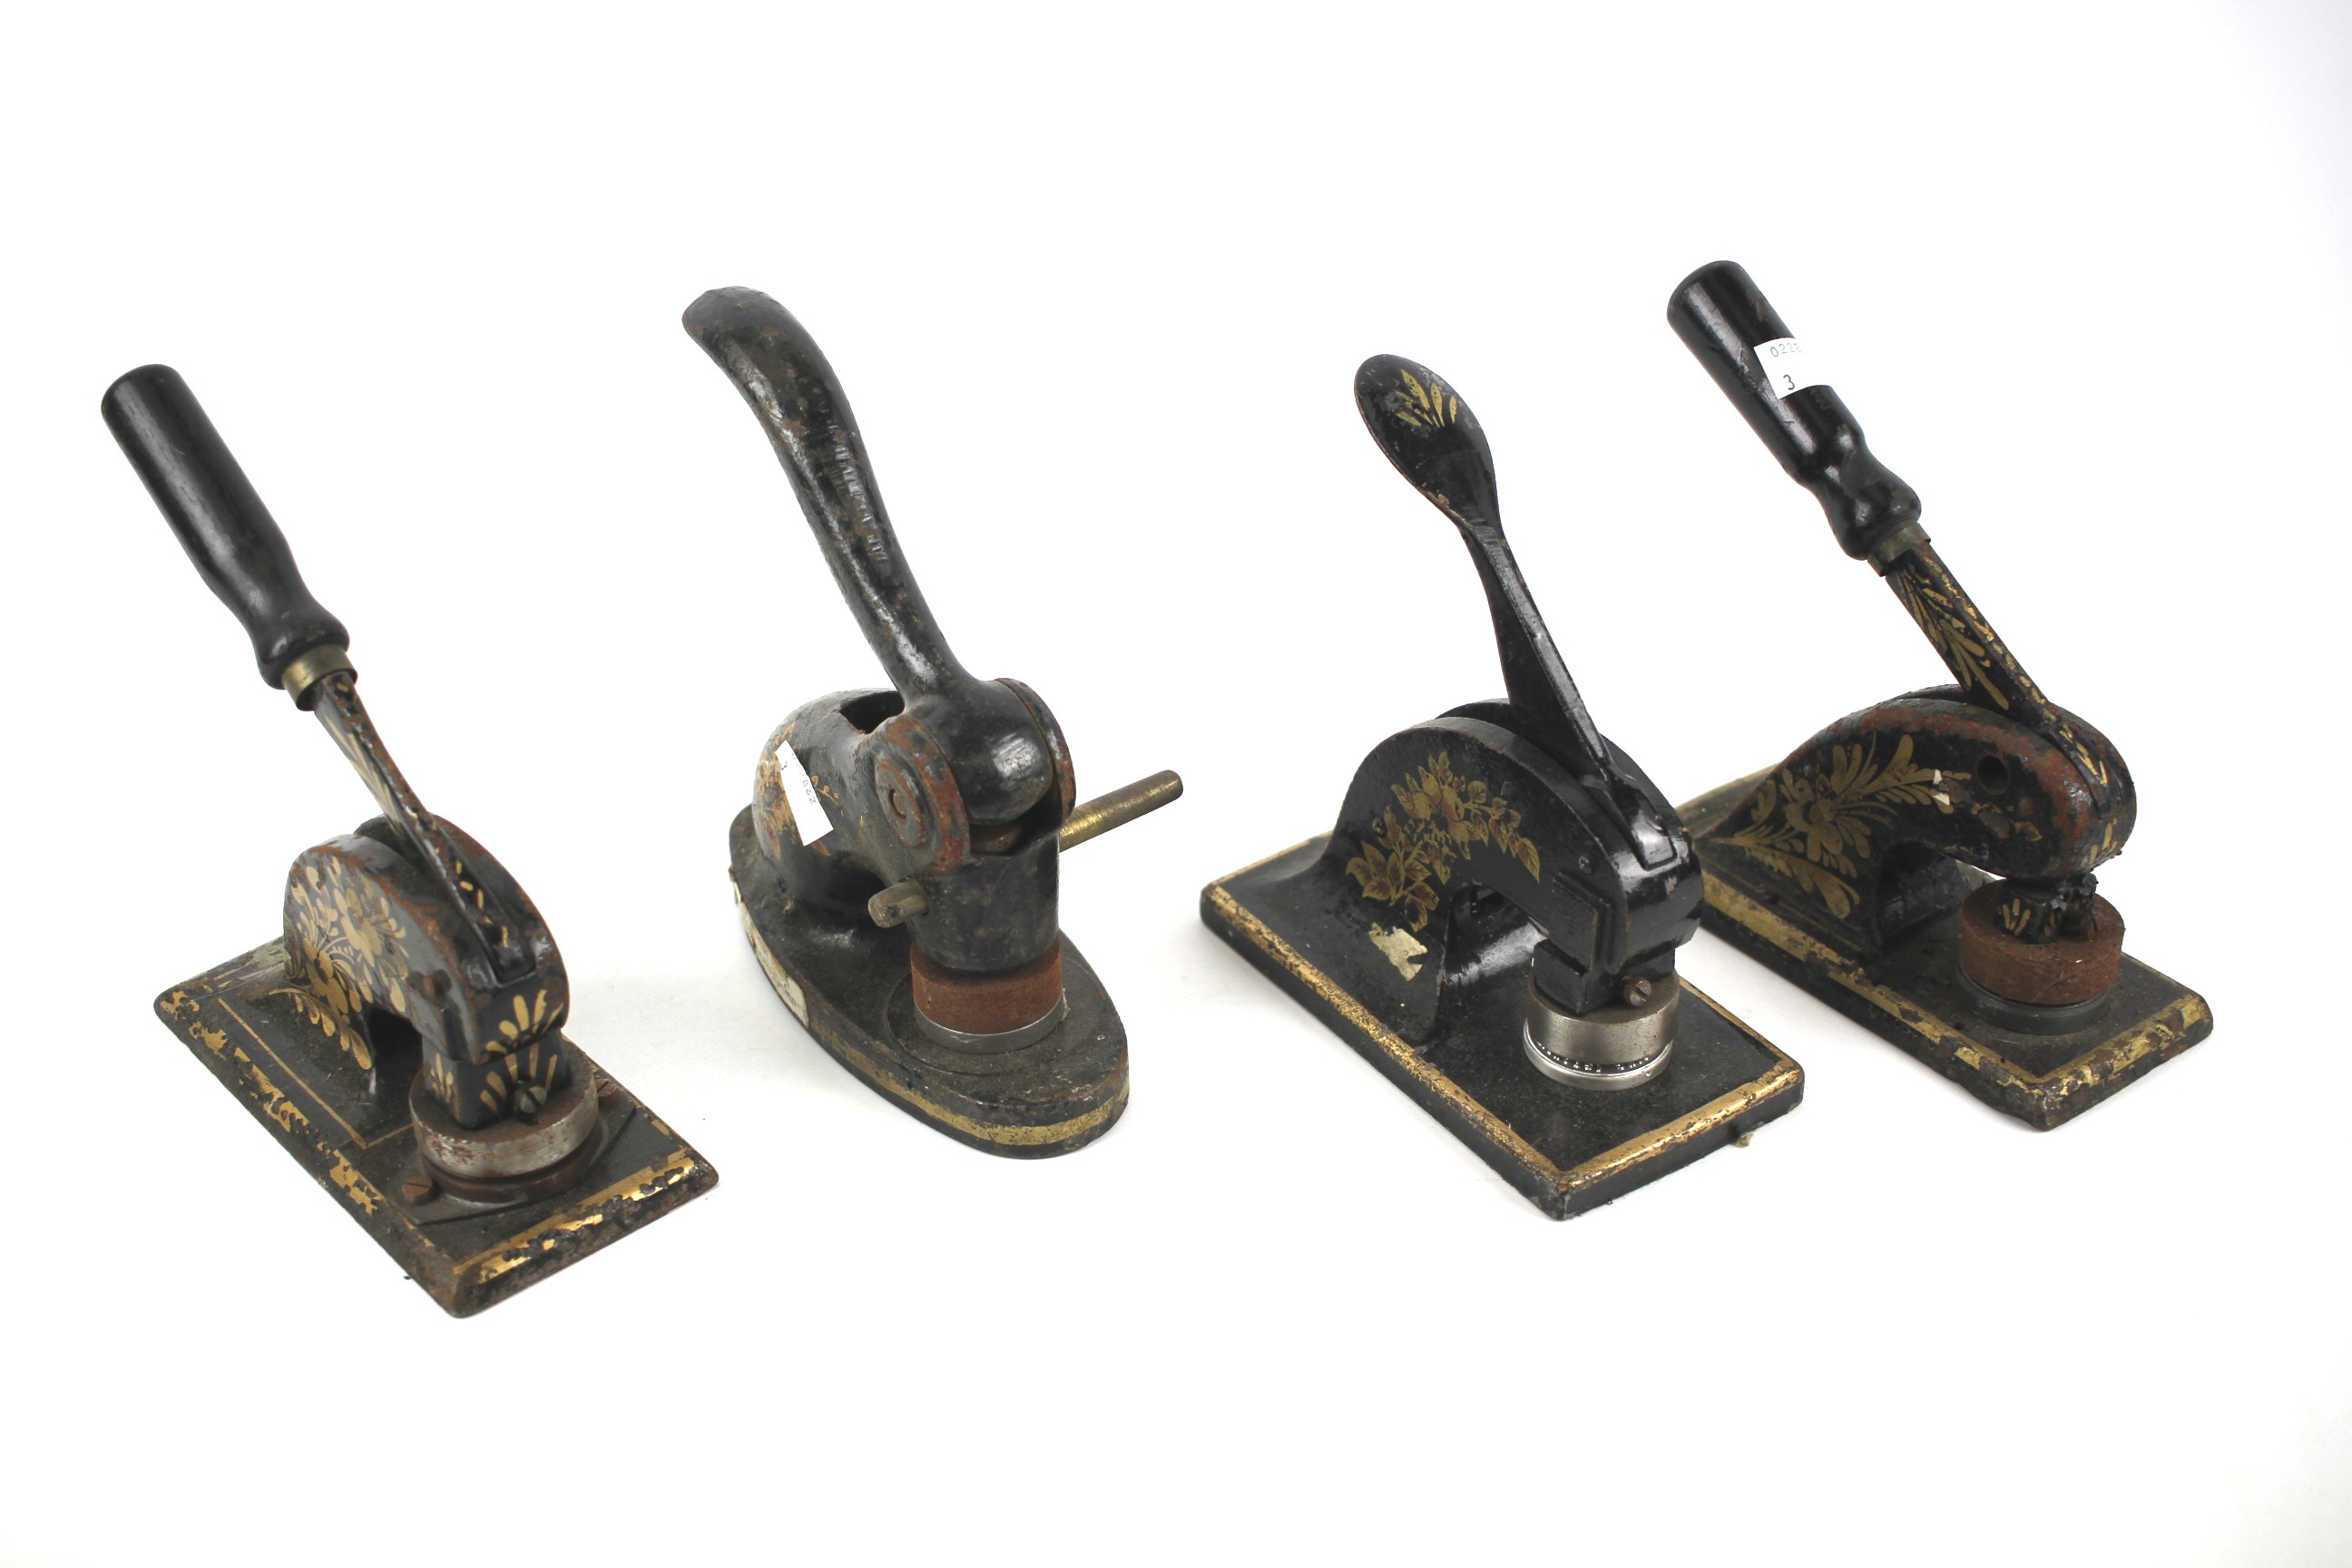 Four Victorian seal press 'shoes' decorated in gilt on a black ground.